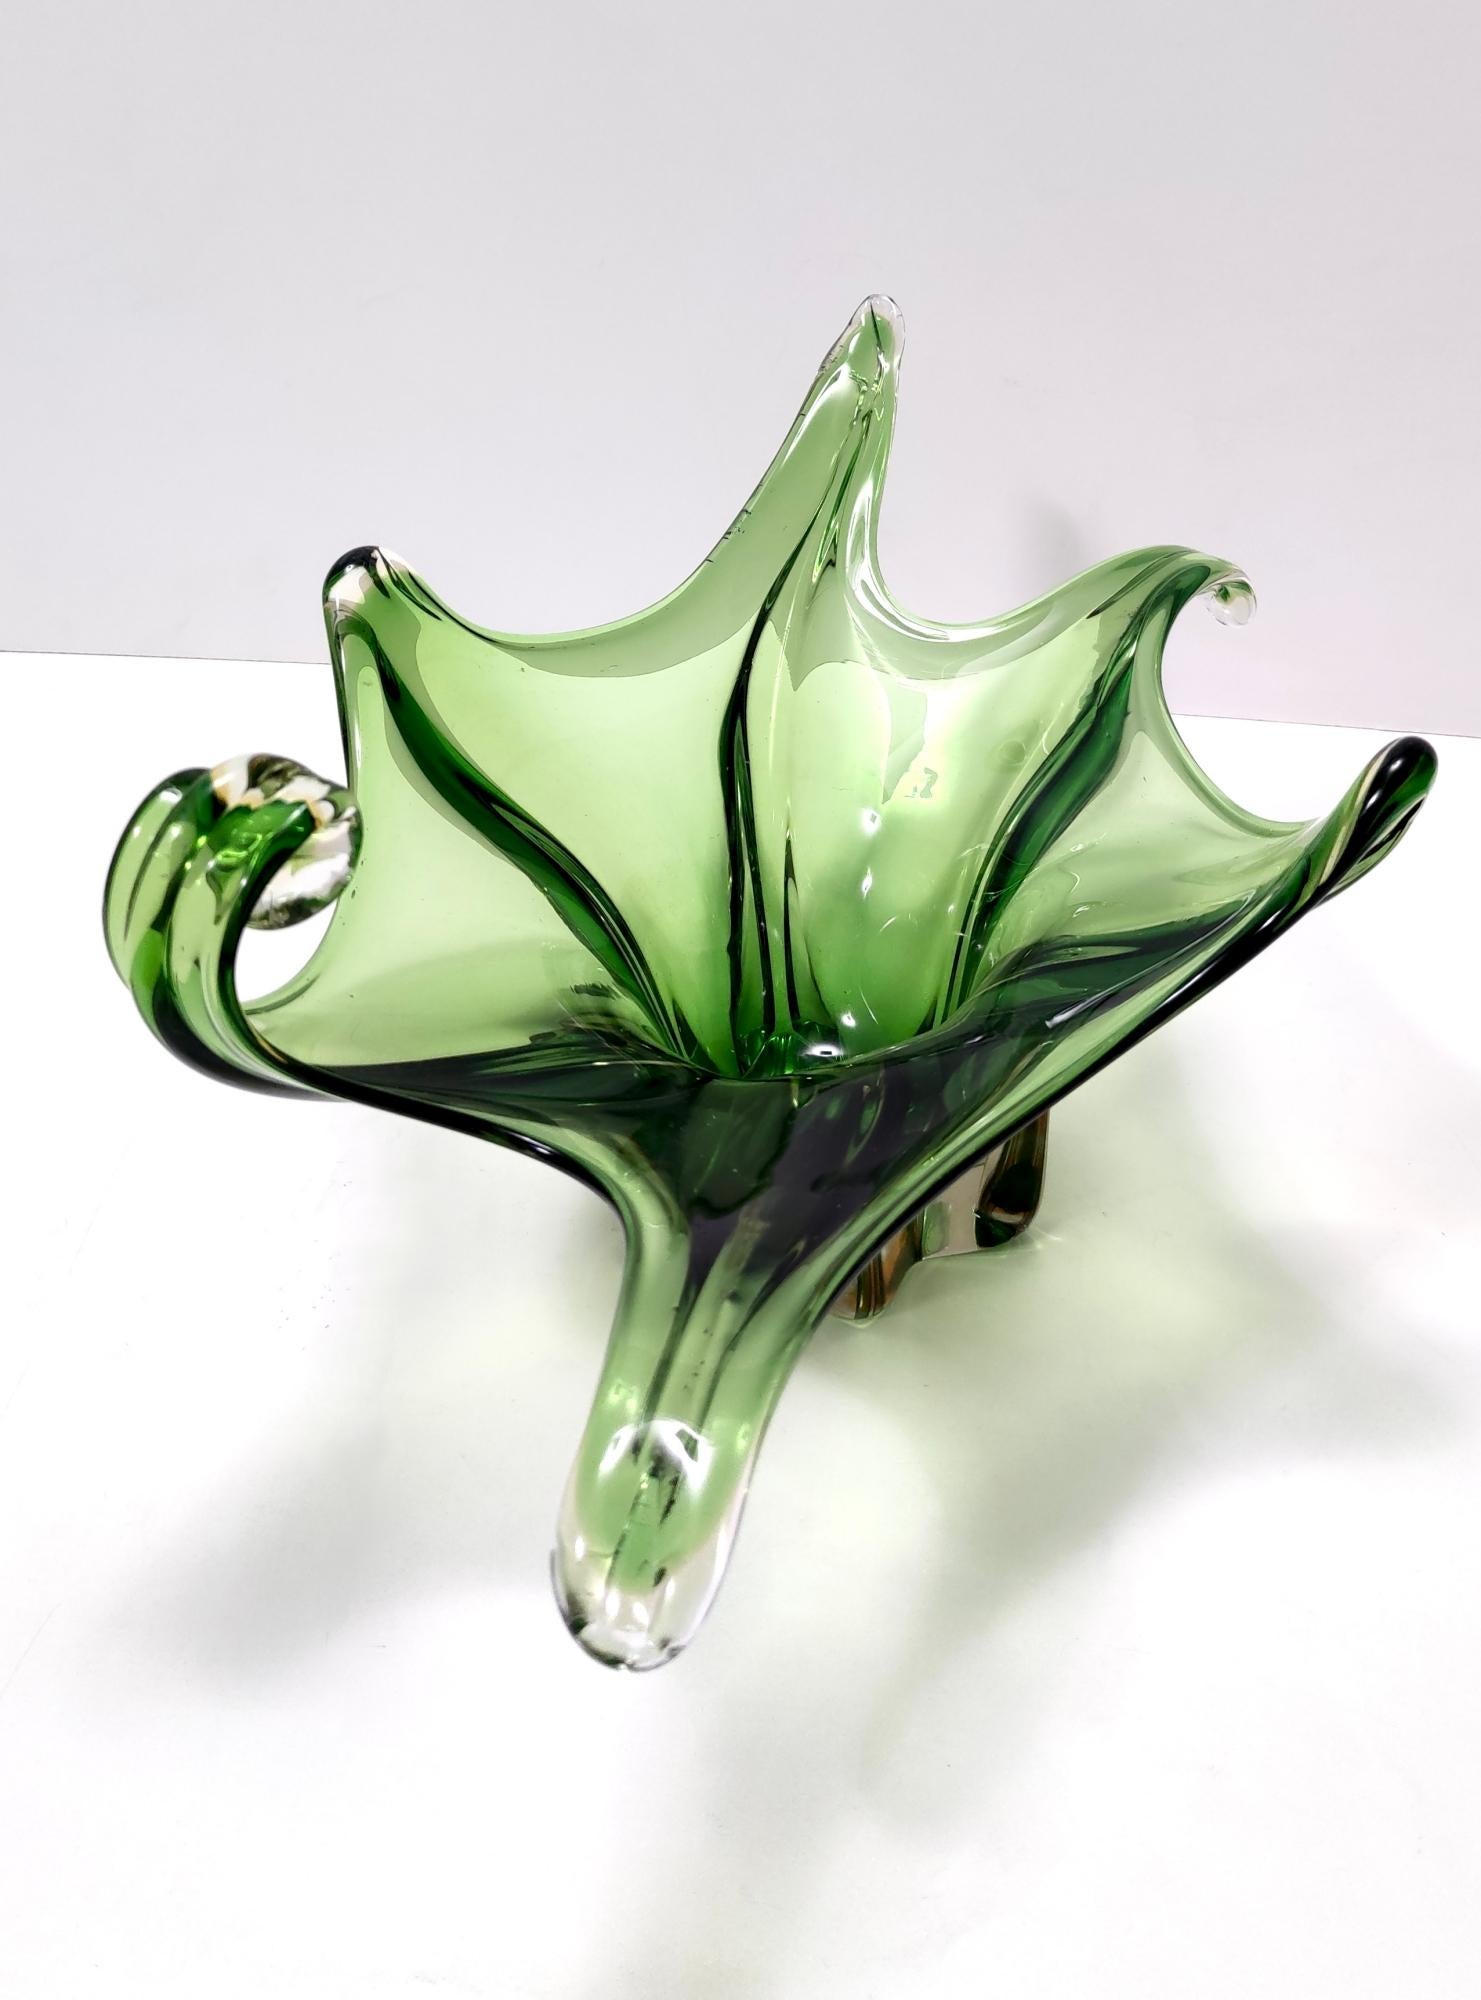 Stunning Vintage Green Murano Glass Bowl or Centerpiece, Italy 2